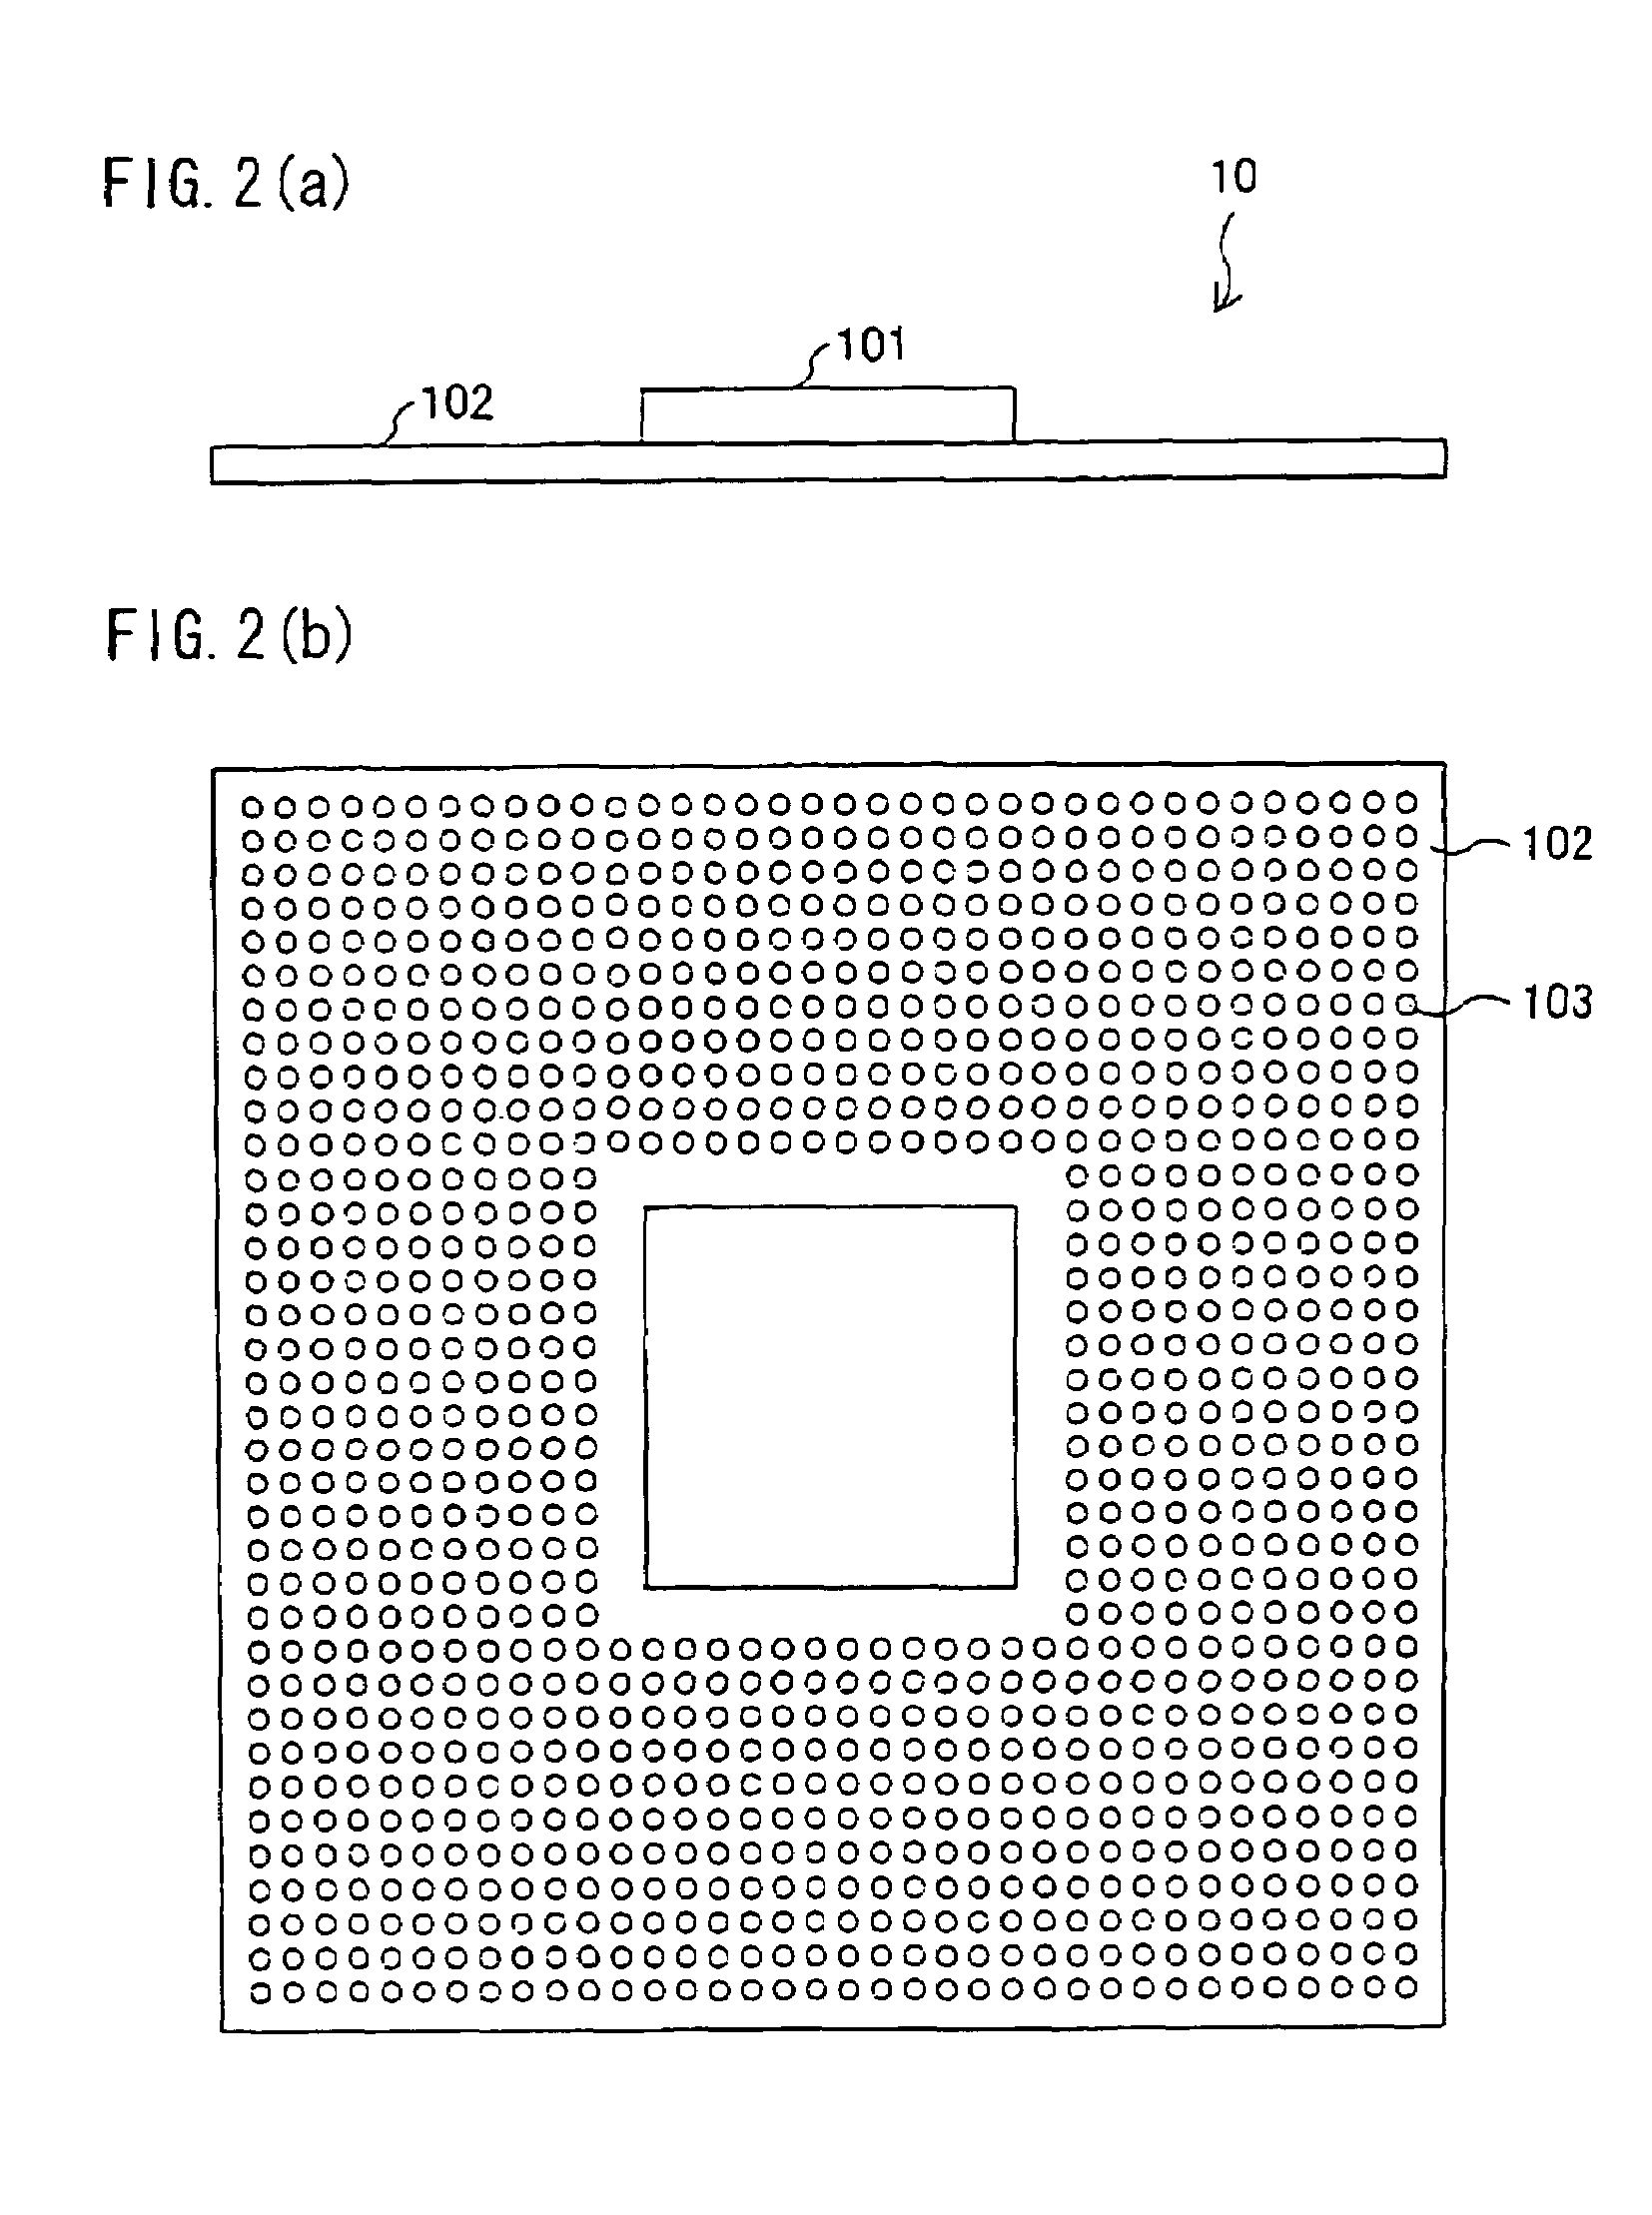 Mounting member of semiconductor device, mounting configuration of semiconductor device, and drive unit of semiconductor device